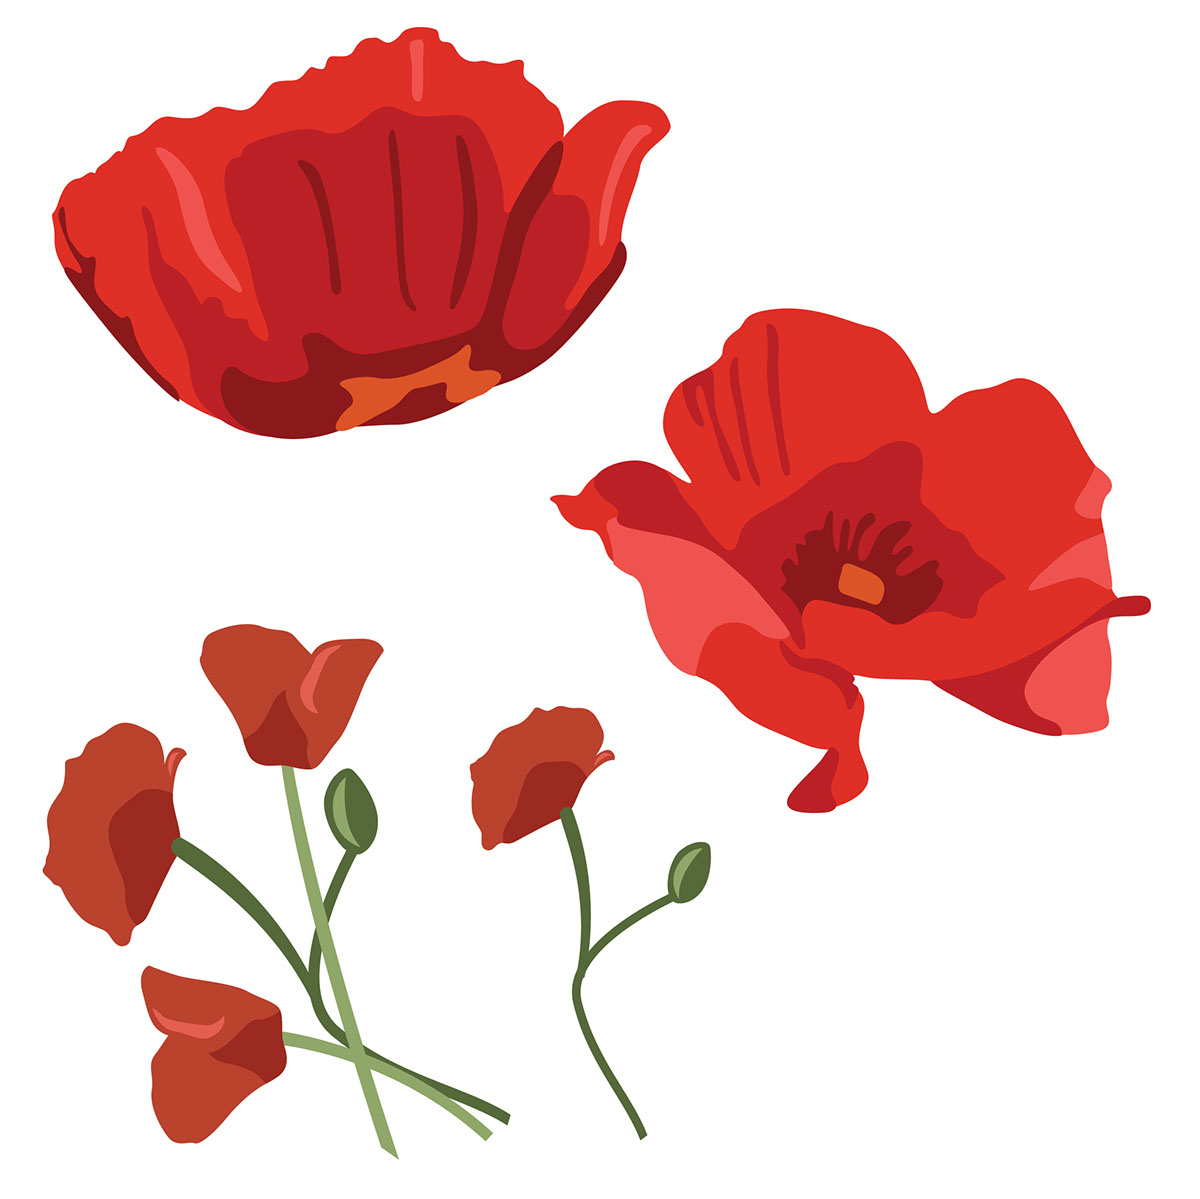 Poppies Soft rendition image